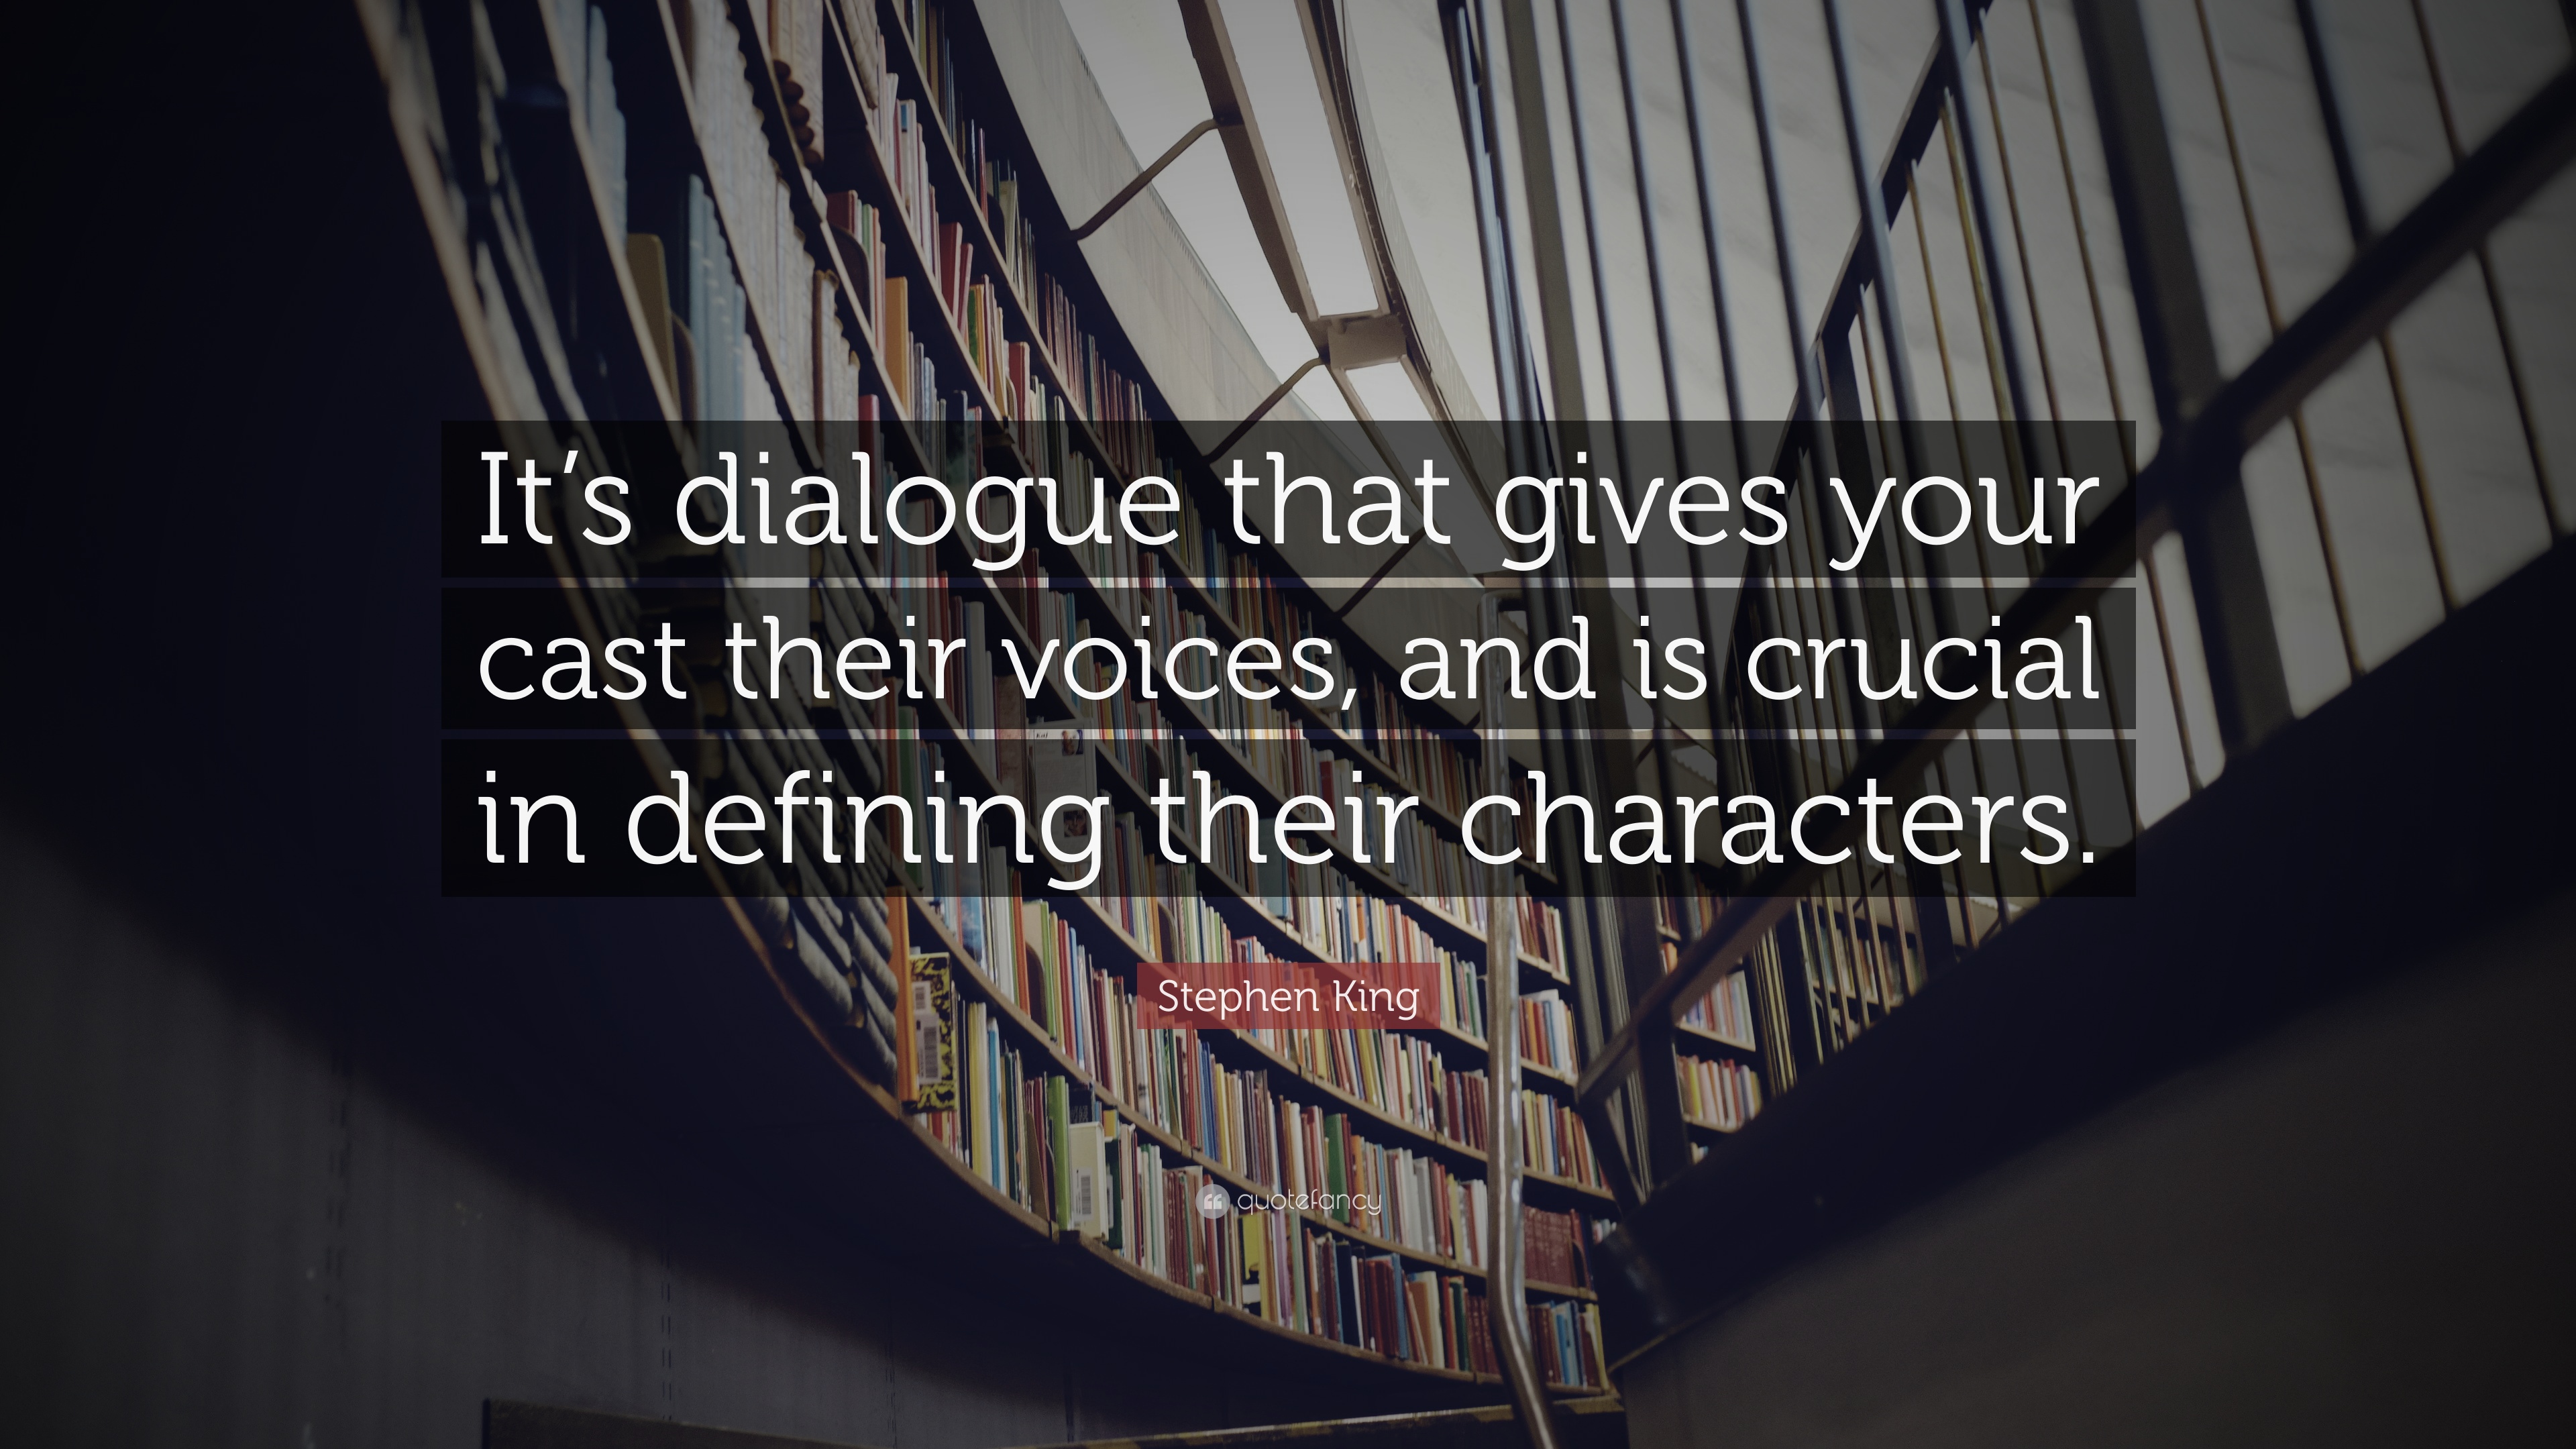 Stephen King Quotes: Lessons in Writing Dialogue and Voice